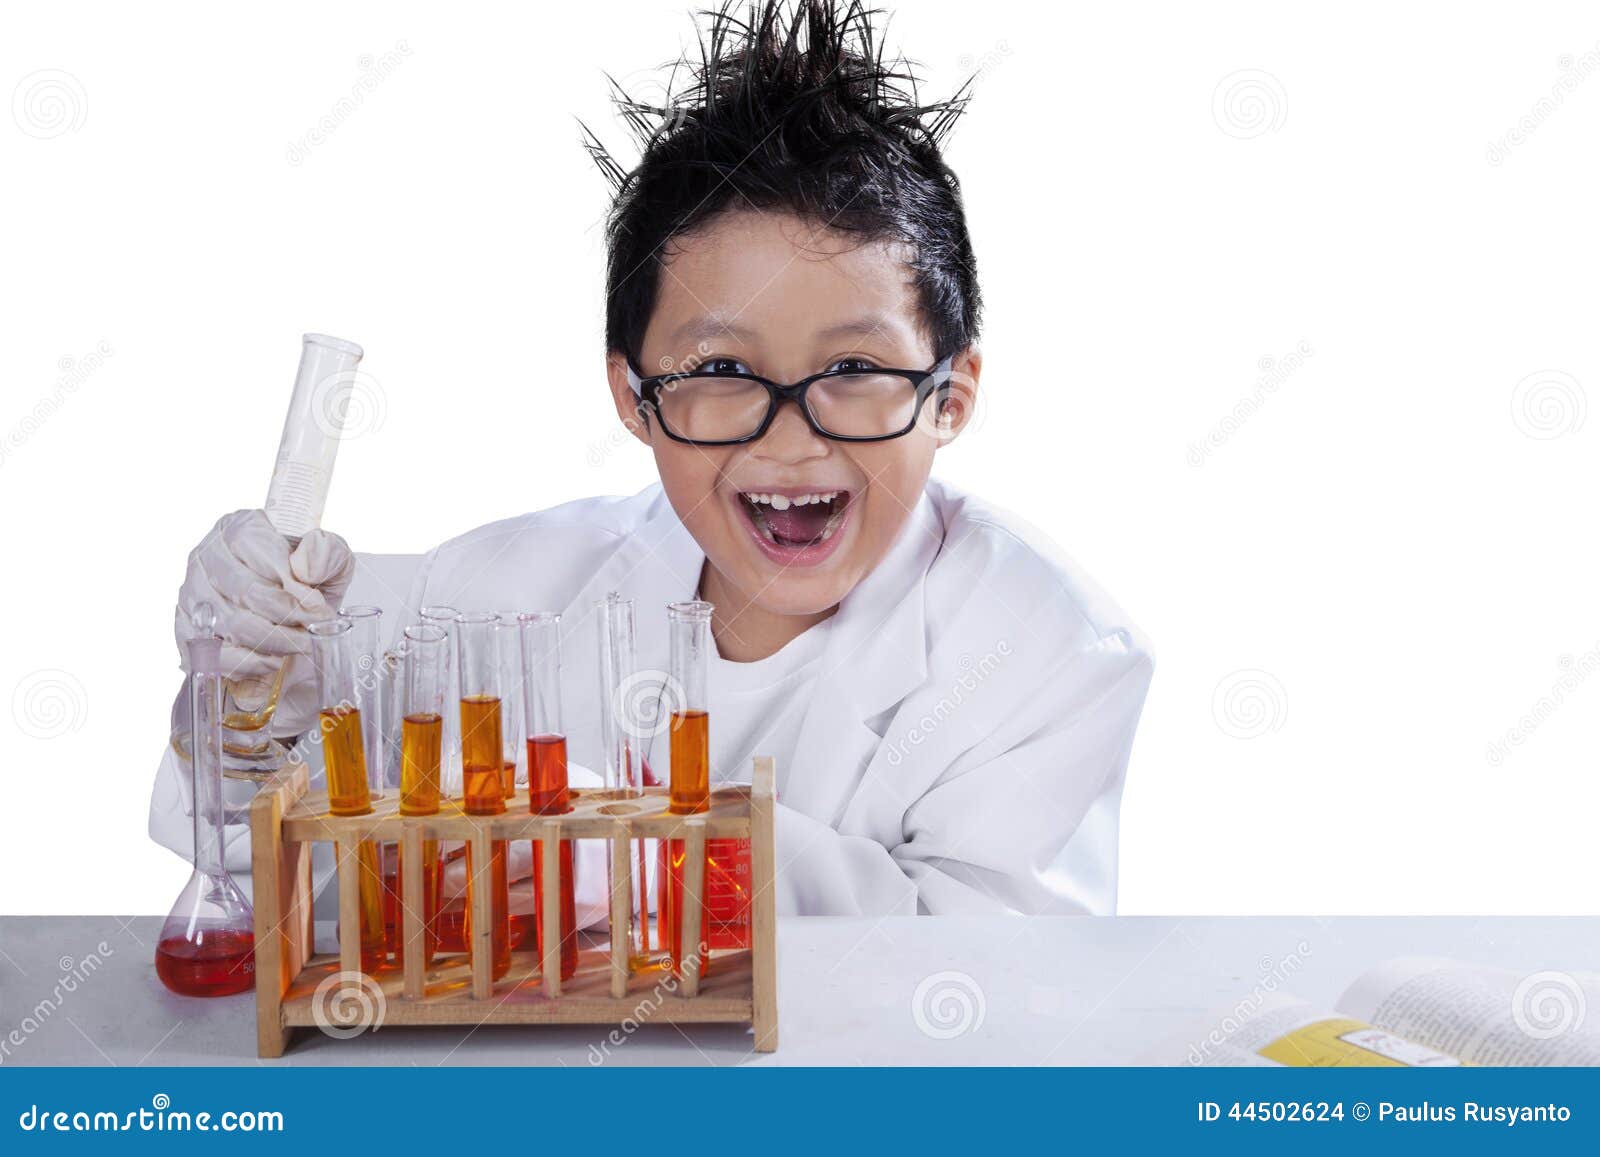 little-mad-scientist-doing-research-portrait-isolated-over-white-background-44502624.jpg